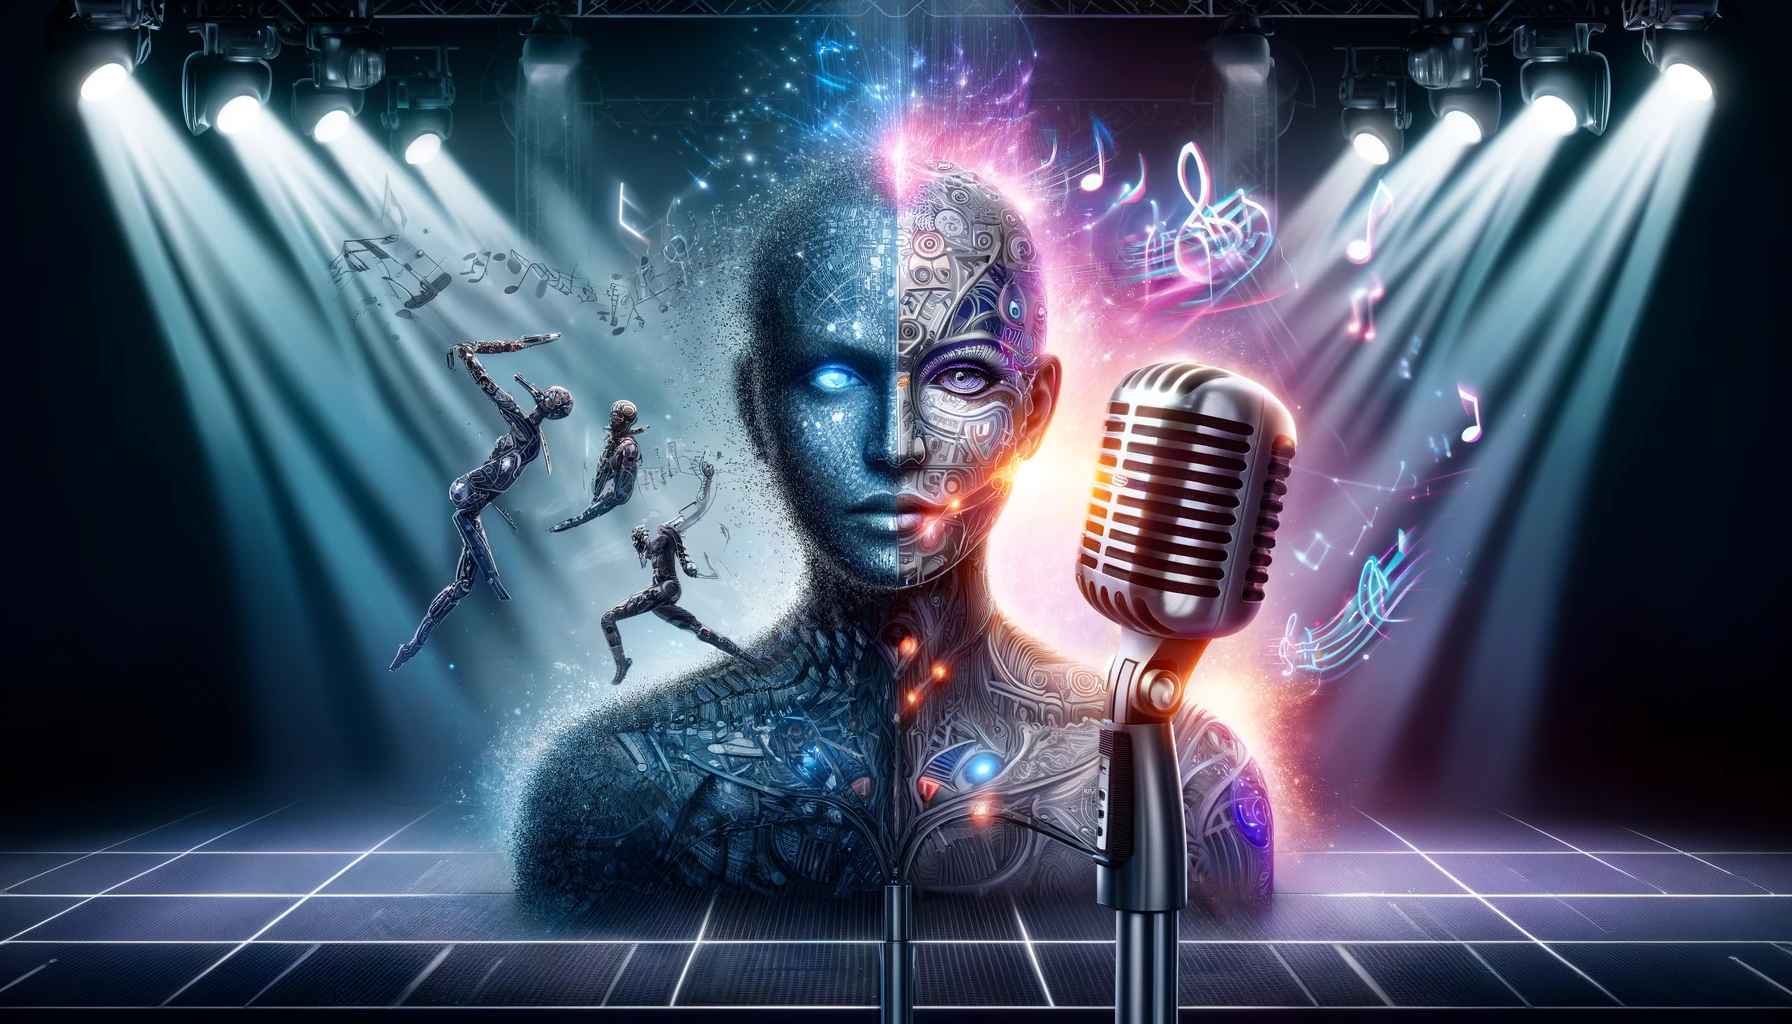 A horizontal image depicting a famous singer morphing into an AI while performing on stage. One half of the singer's face and body is human, while the other half transitions into a digital or robotic form. The image includes elements like a microphone, musical notes, and digital effects to emphasize the performance and transformation. The background blends elements of a concert stage with futuristic, tech-inspired visuals.